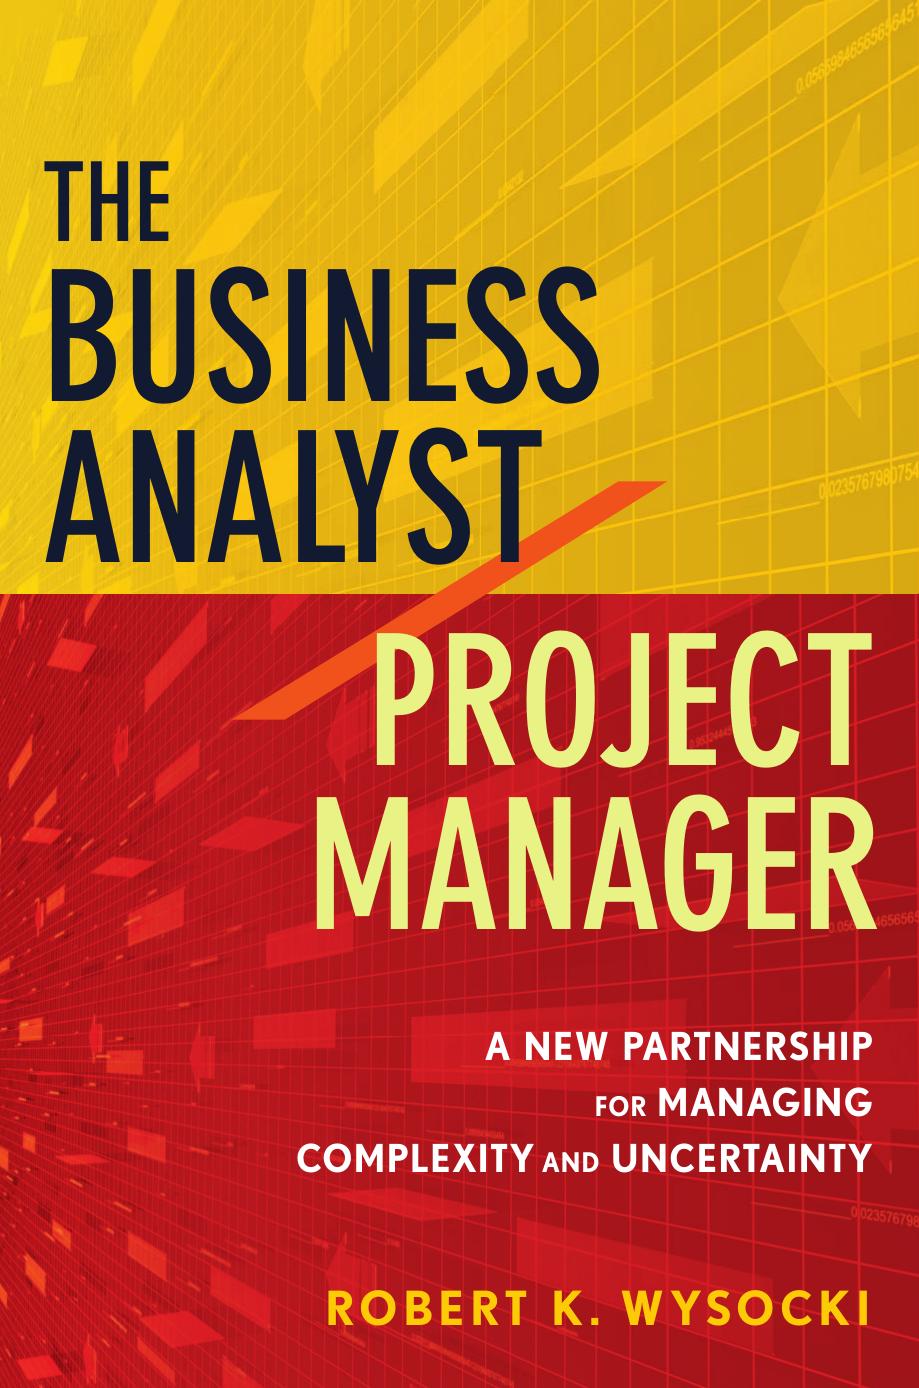 The Business Analyst / Project Manager: A New Partnership for Managing Complexity and Uncertainty